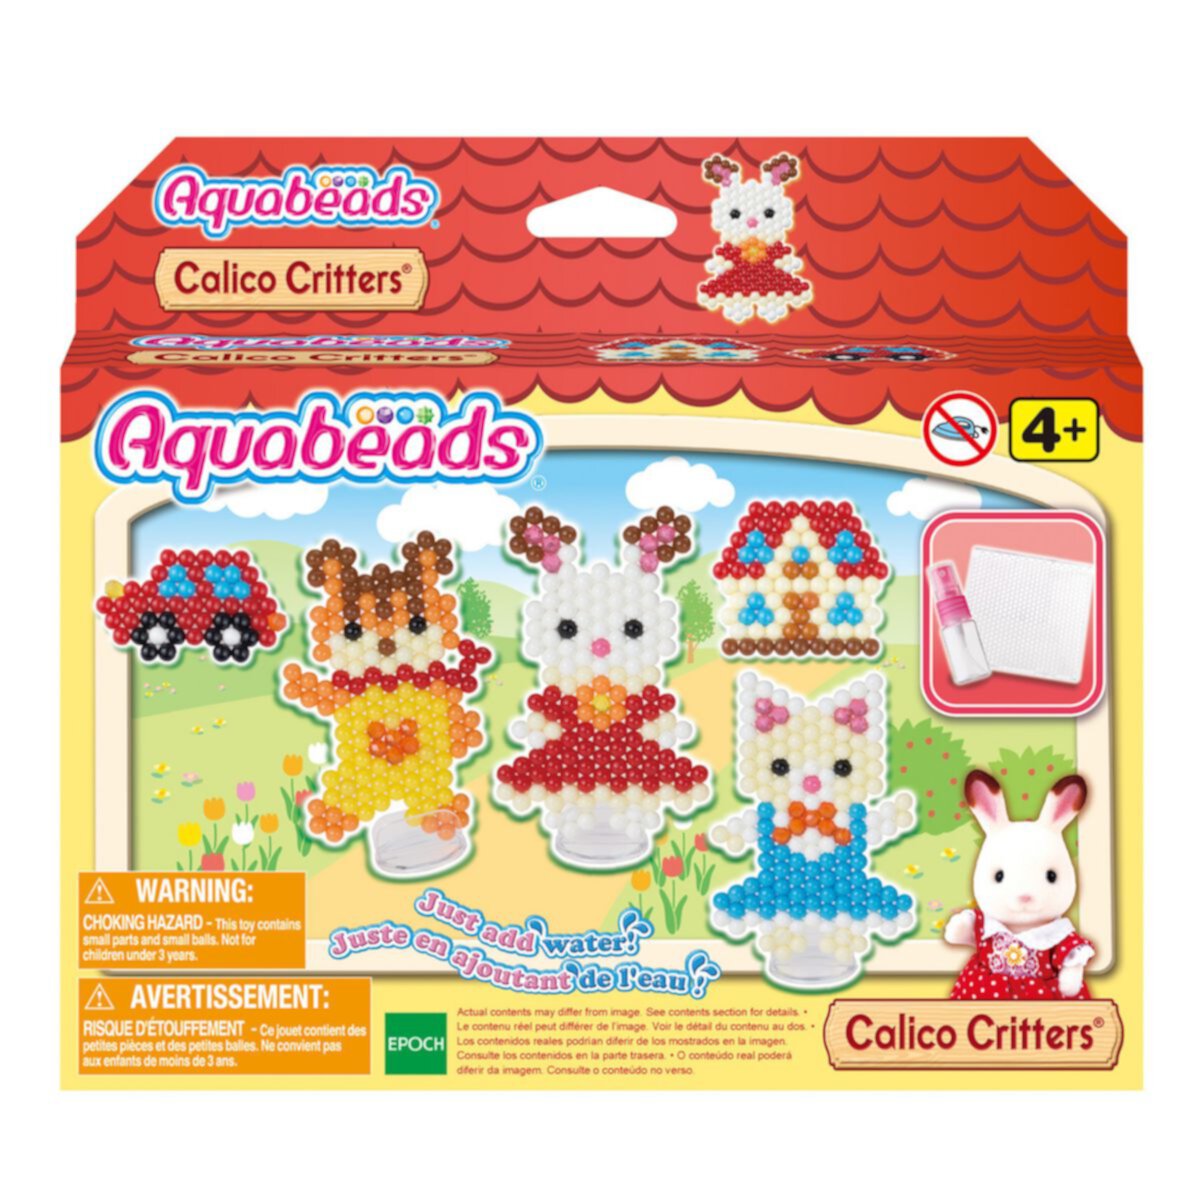 Aquabeads Calico Critters Character Set Complete Arts & Crafts Bead Kit Aquabeads